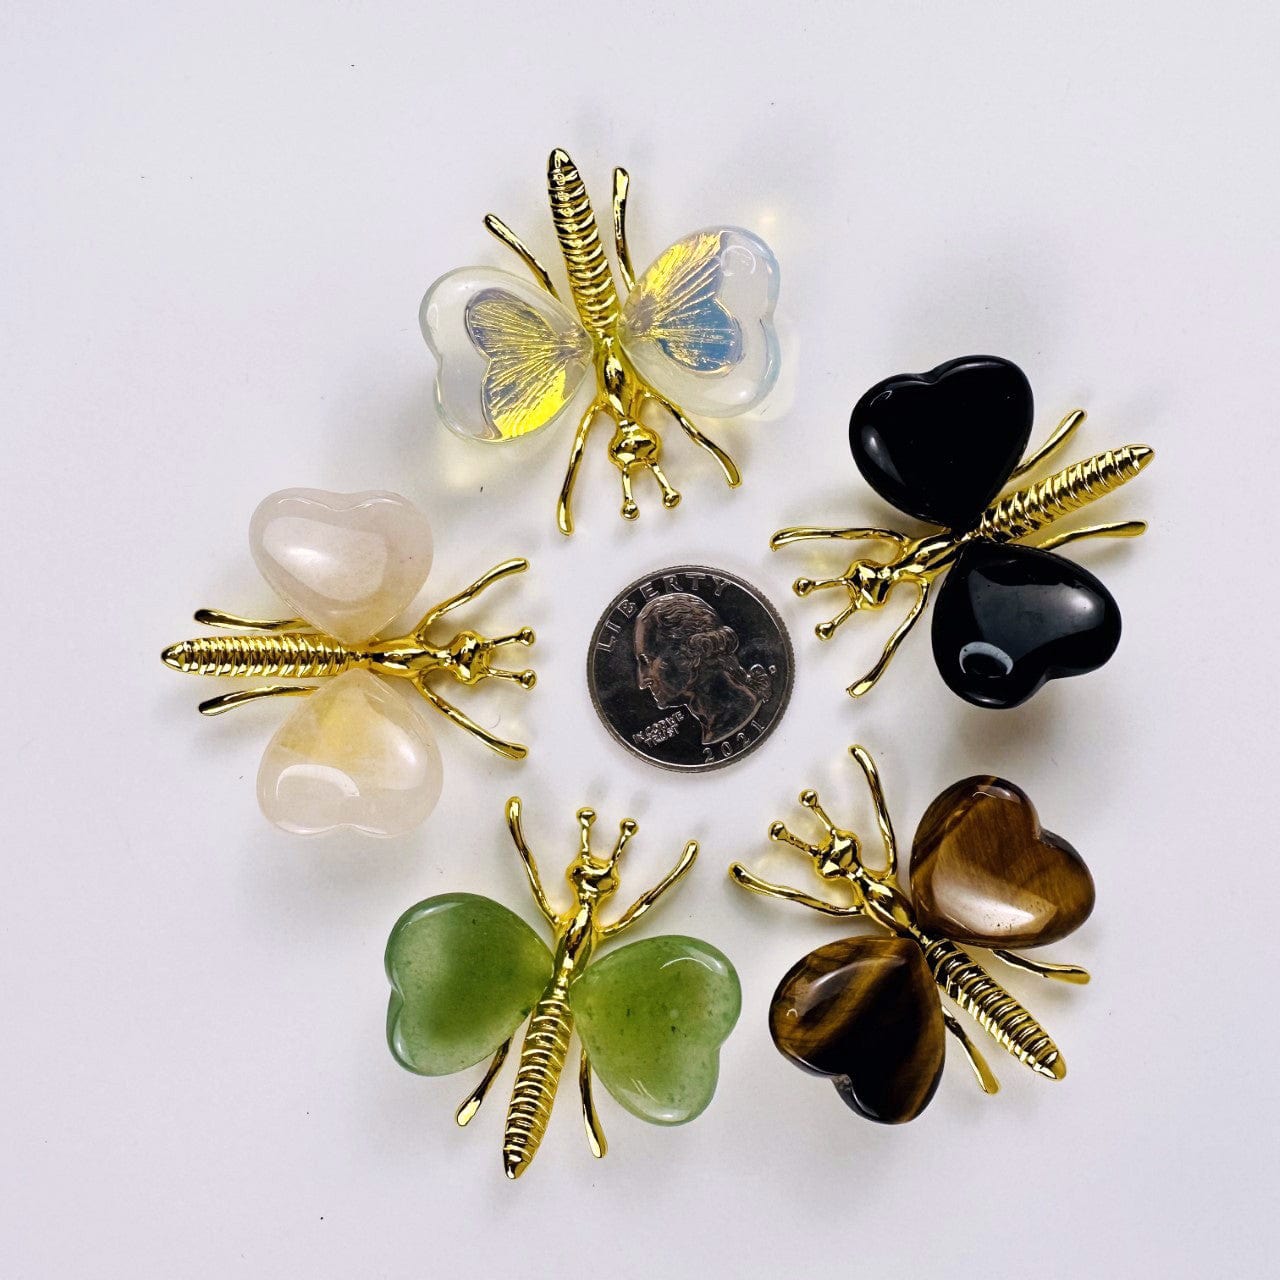 Gemstone Butterflies with Gold Tone Body around a quarter for size reference